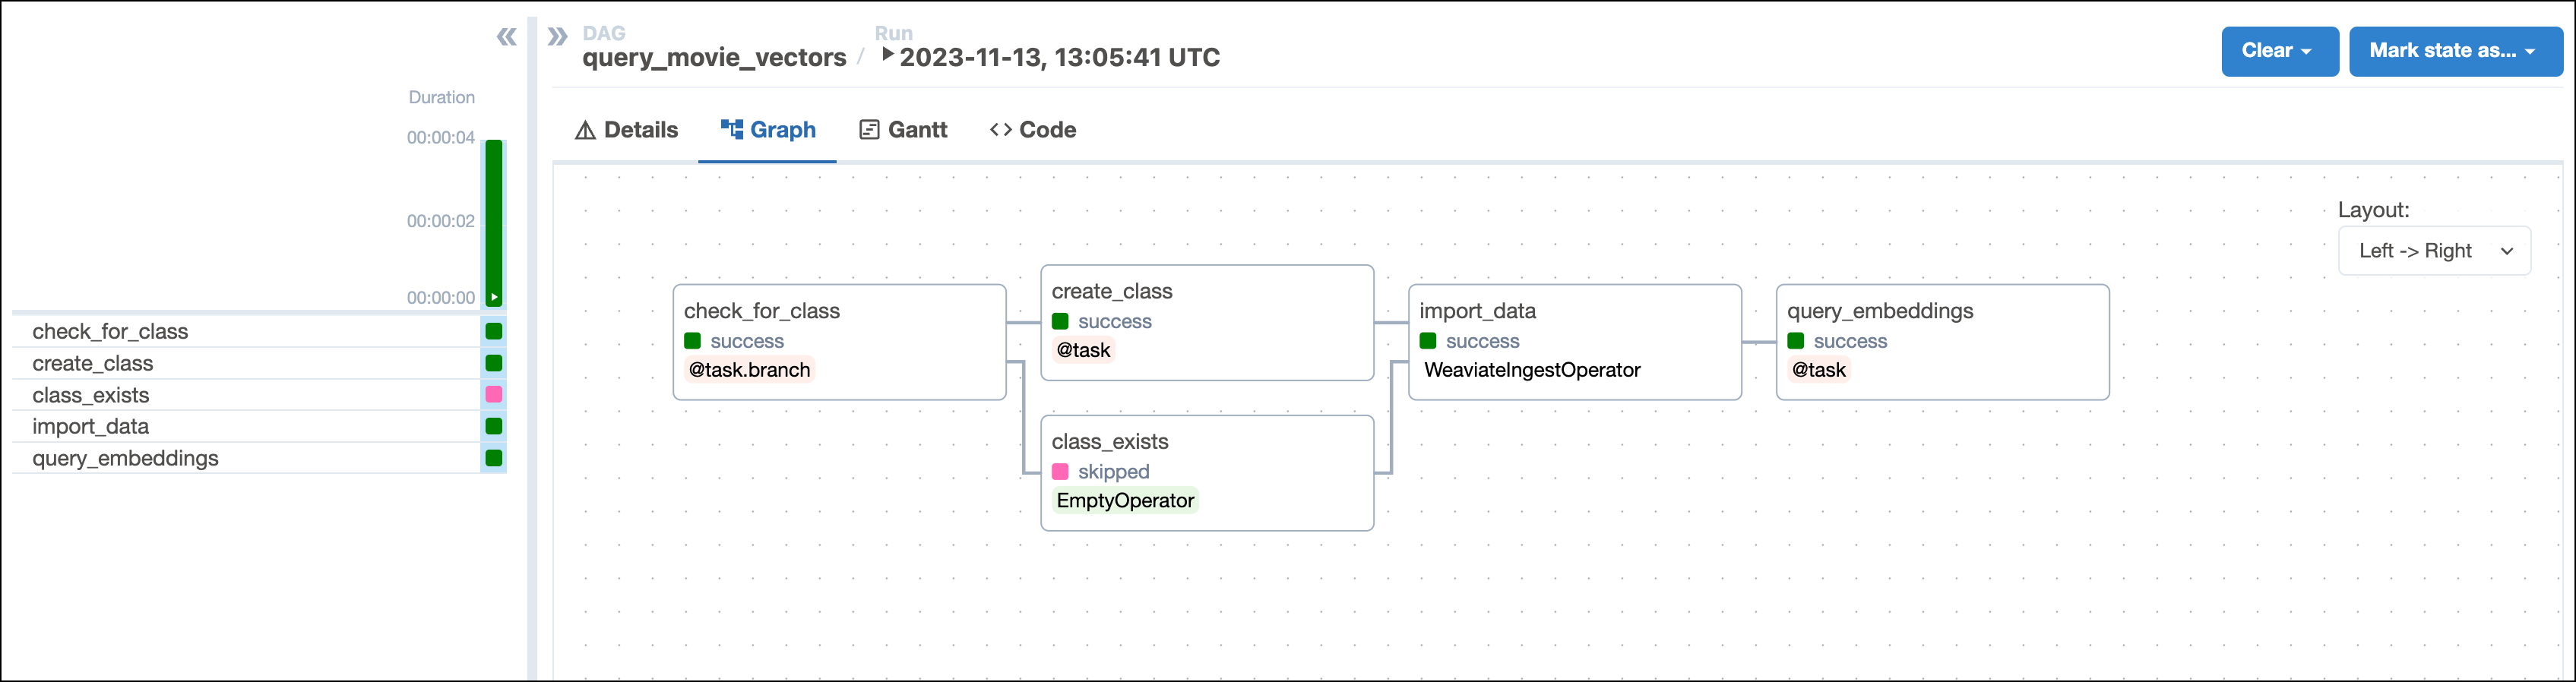 Screenshot of the Airflow UI showing the successful completion of the query_movie_vectors DAG in the Grid view with the Graph tab selected. Since this was the first run of the DAG, the schema had to be newly created. The schema creation was enabled when the branching task branch_create_schema selected the downstream create_schema task to run.